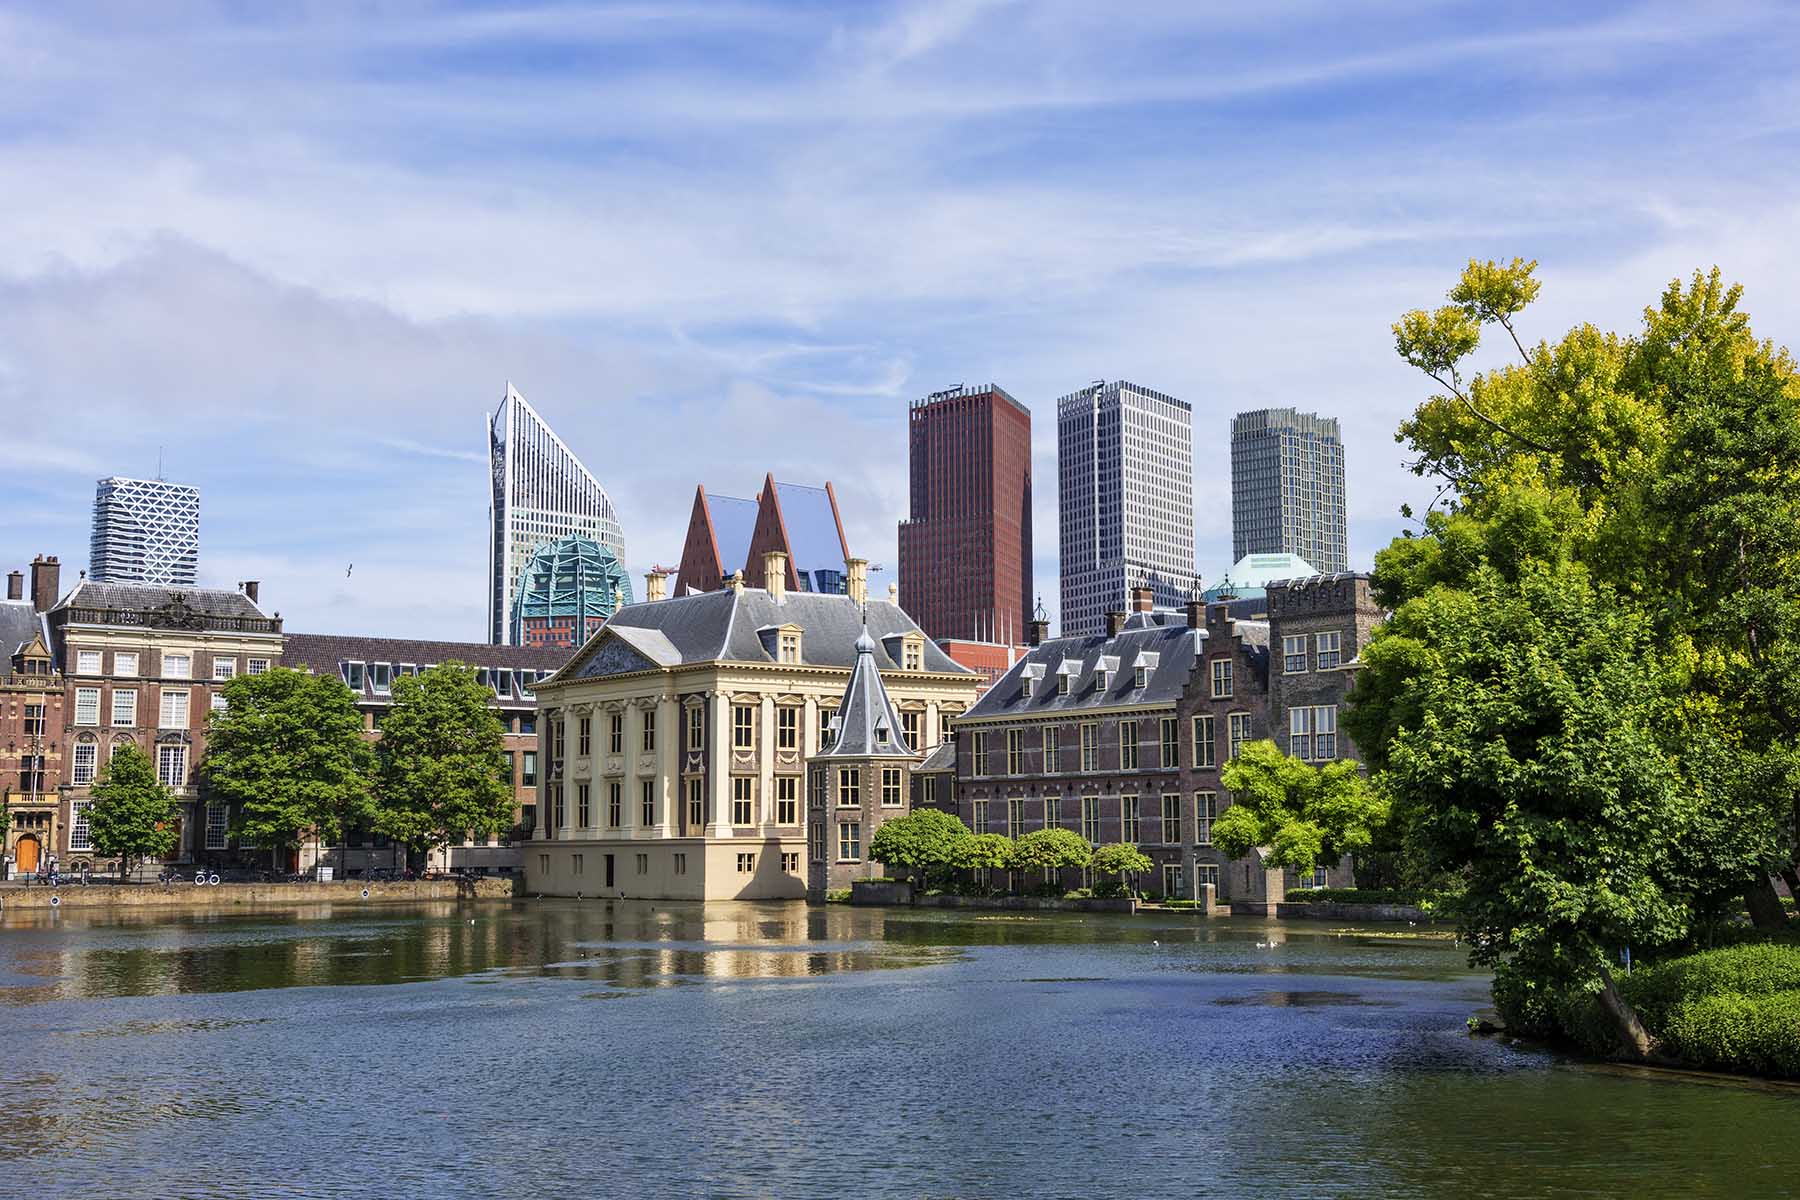 View of the Dutch Parliament (Binnenhof), surrounded by water and the highrise buildings of The Hague in the background